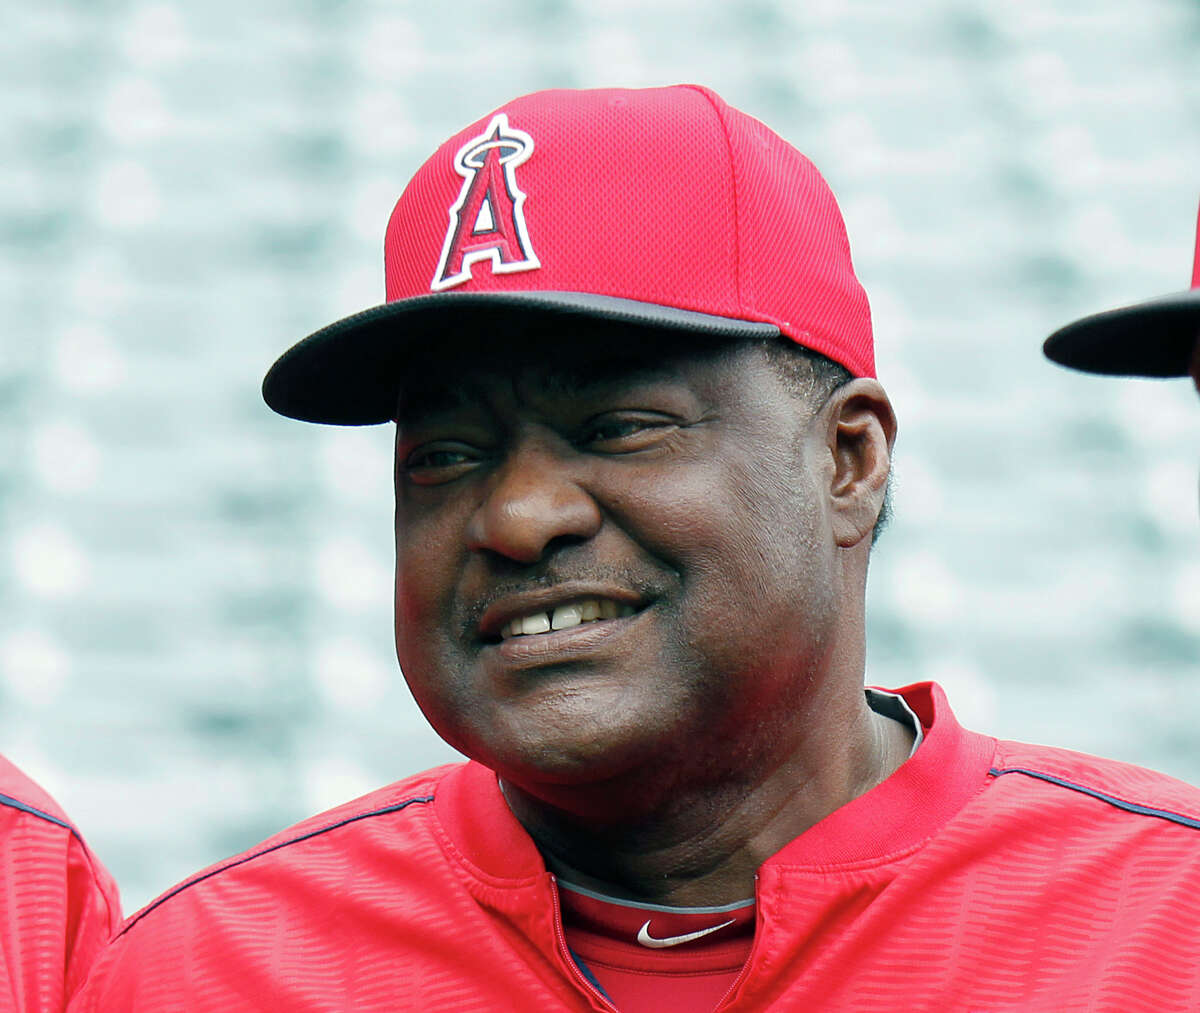 FILE - In this April 23, 2015, file photo, Los Angeles Angels' Don Baylor poses for a photo before a baseball game against the Oakland Athletics, in Anaheim, Calif. Don Baylor, the 1979 AL MVP with the California Angels who went on to become manager of the year with the Colorado Rockies in 1995, has died. He was 68. Baylor died Monday, Aug. 7, 2017, at a hospital in Austin, Texas, his son, Don Baylor Jr., told the Austin American-Statesman.(AP Photo/Alex Gallardo, File)